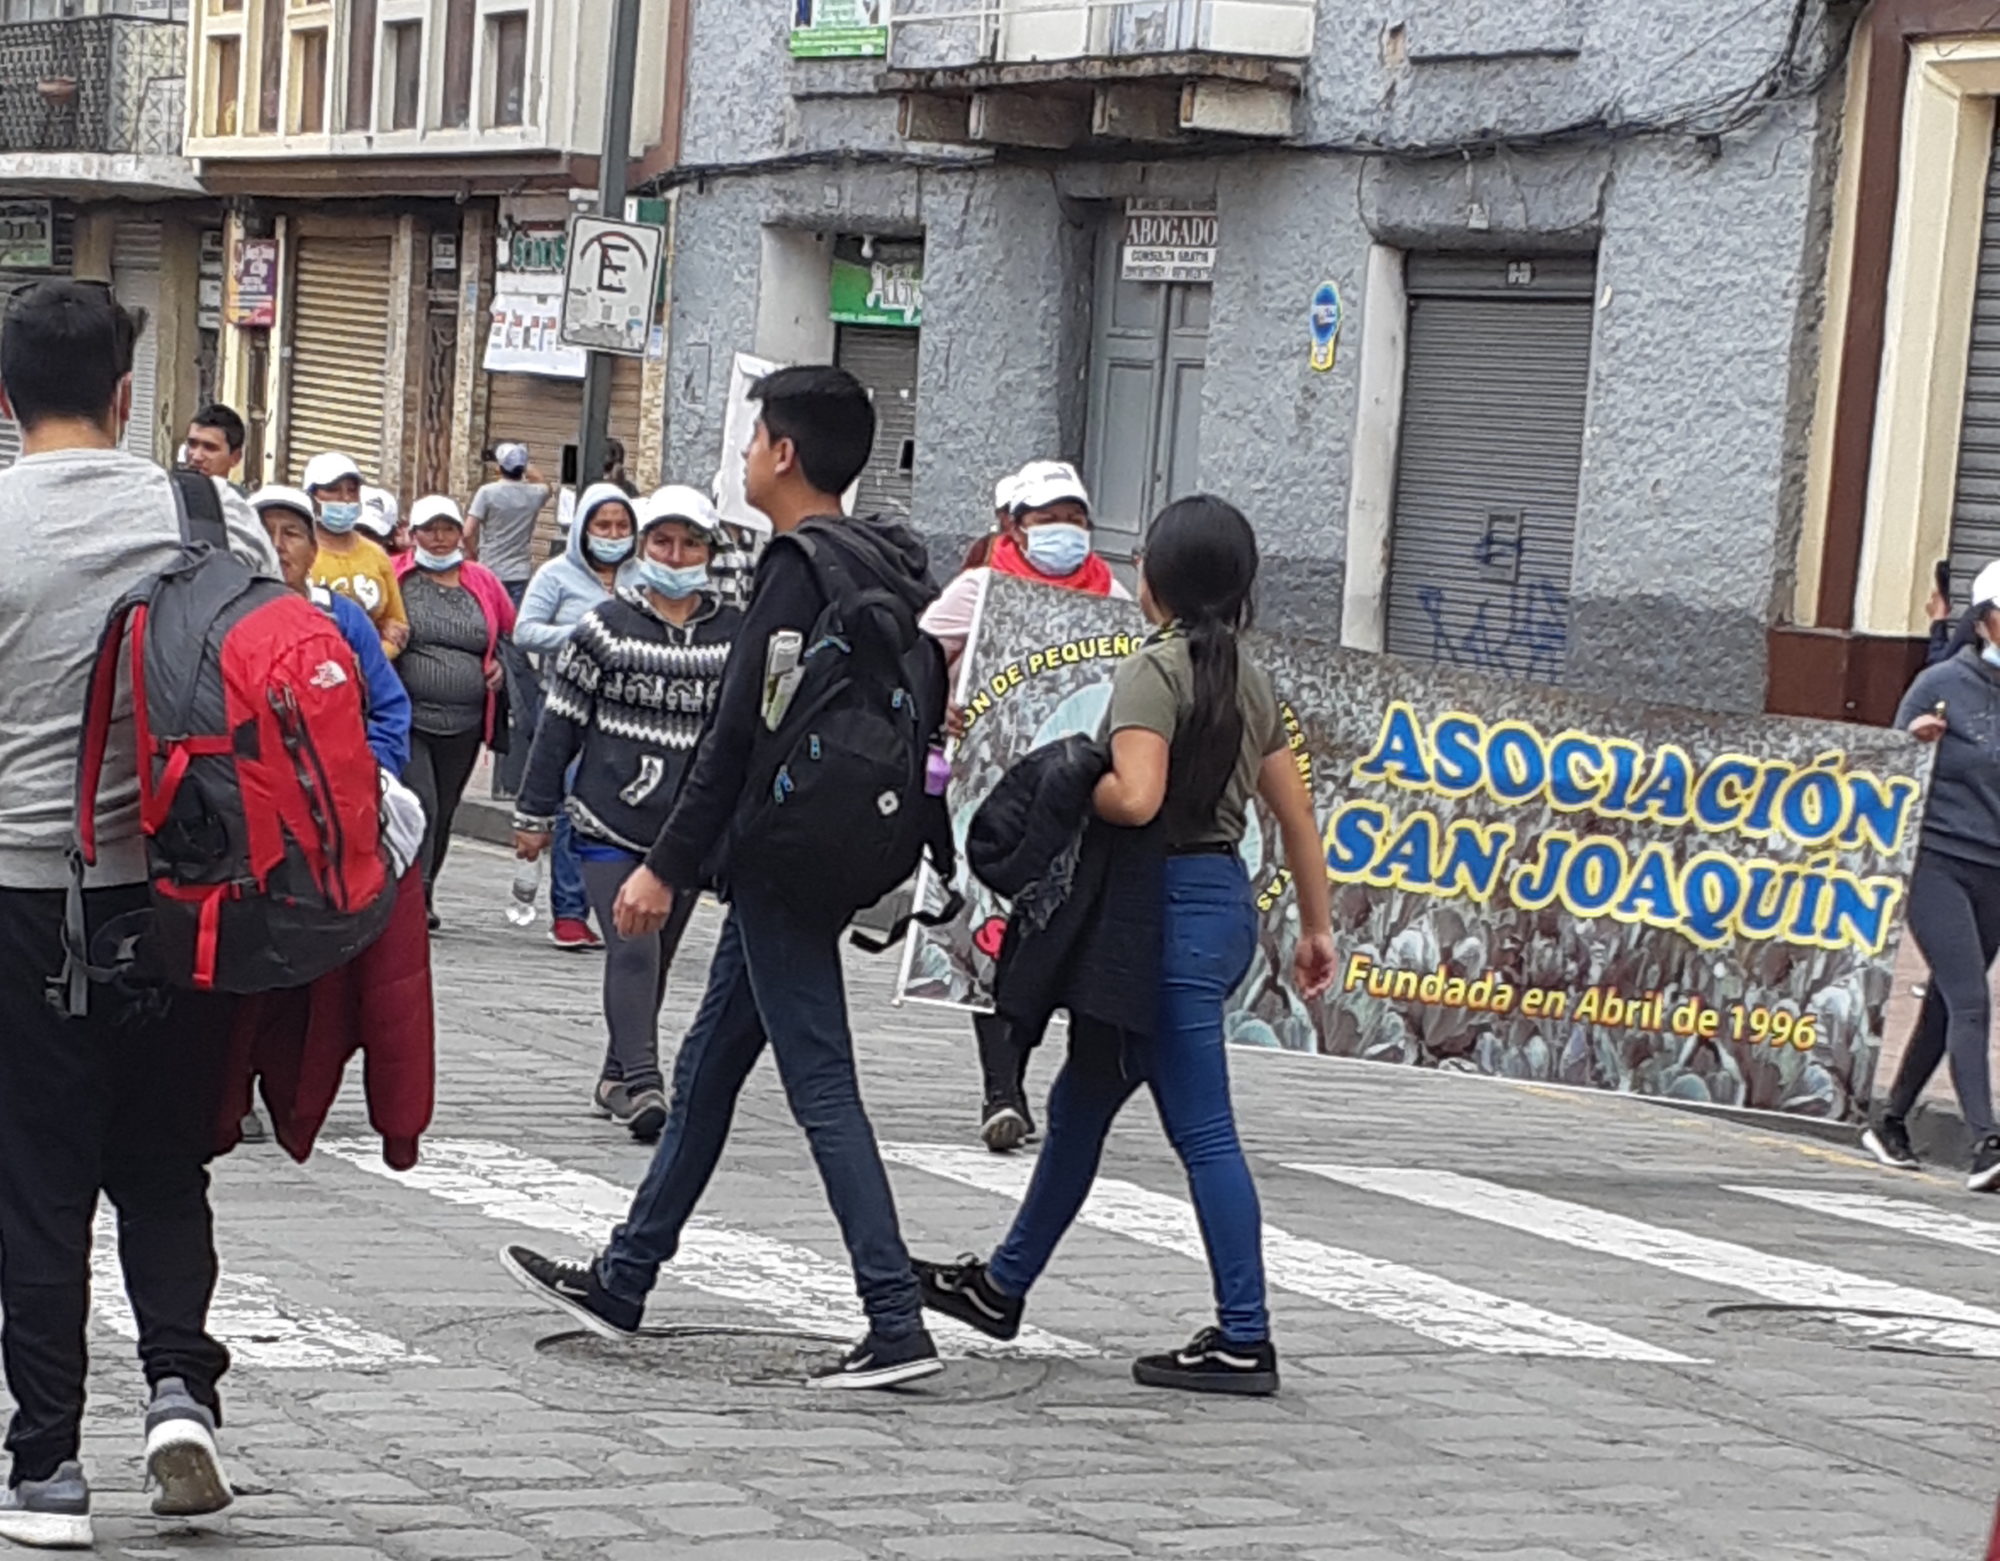 Surviving Ecuador: National riot breaks out while studying abroad